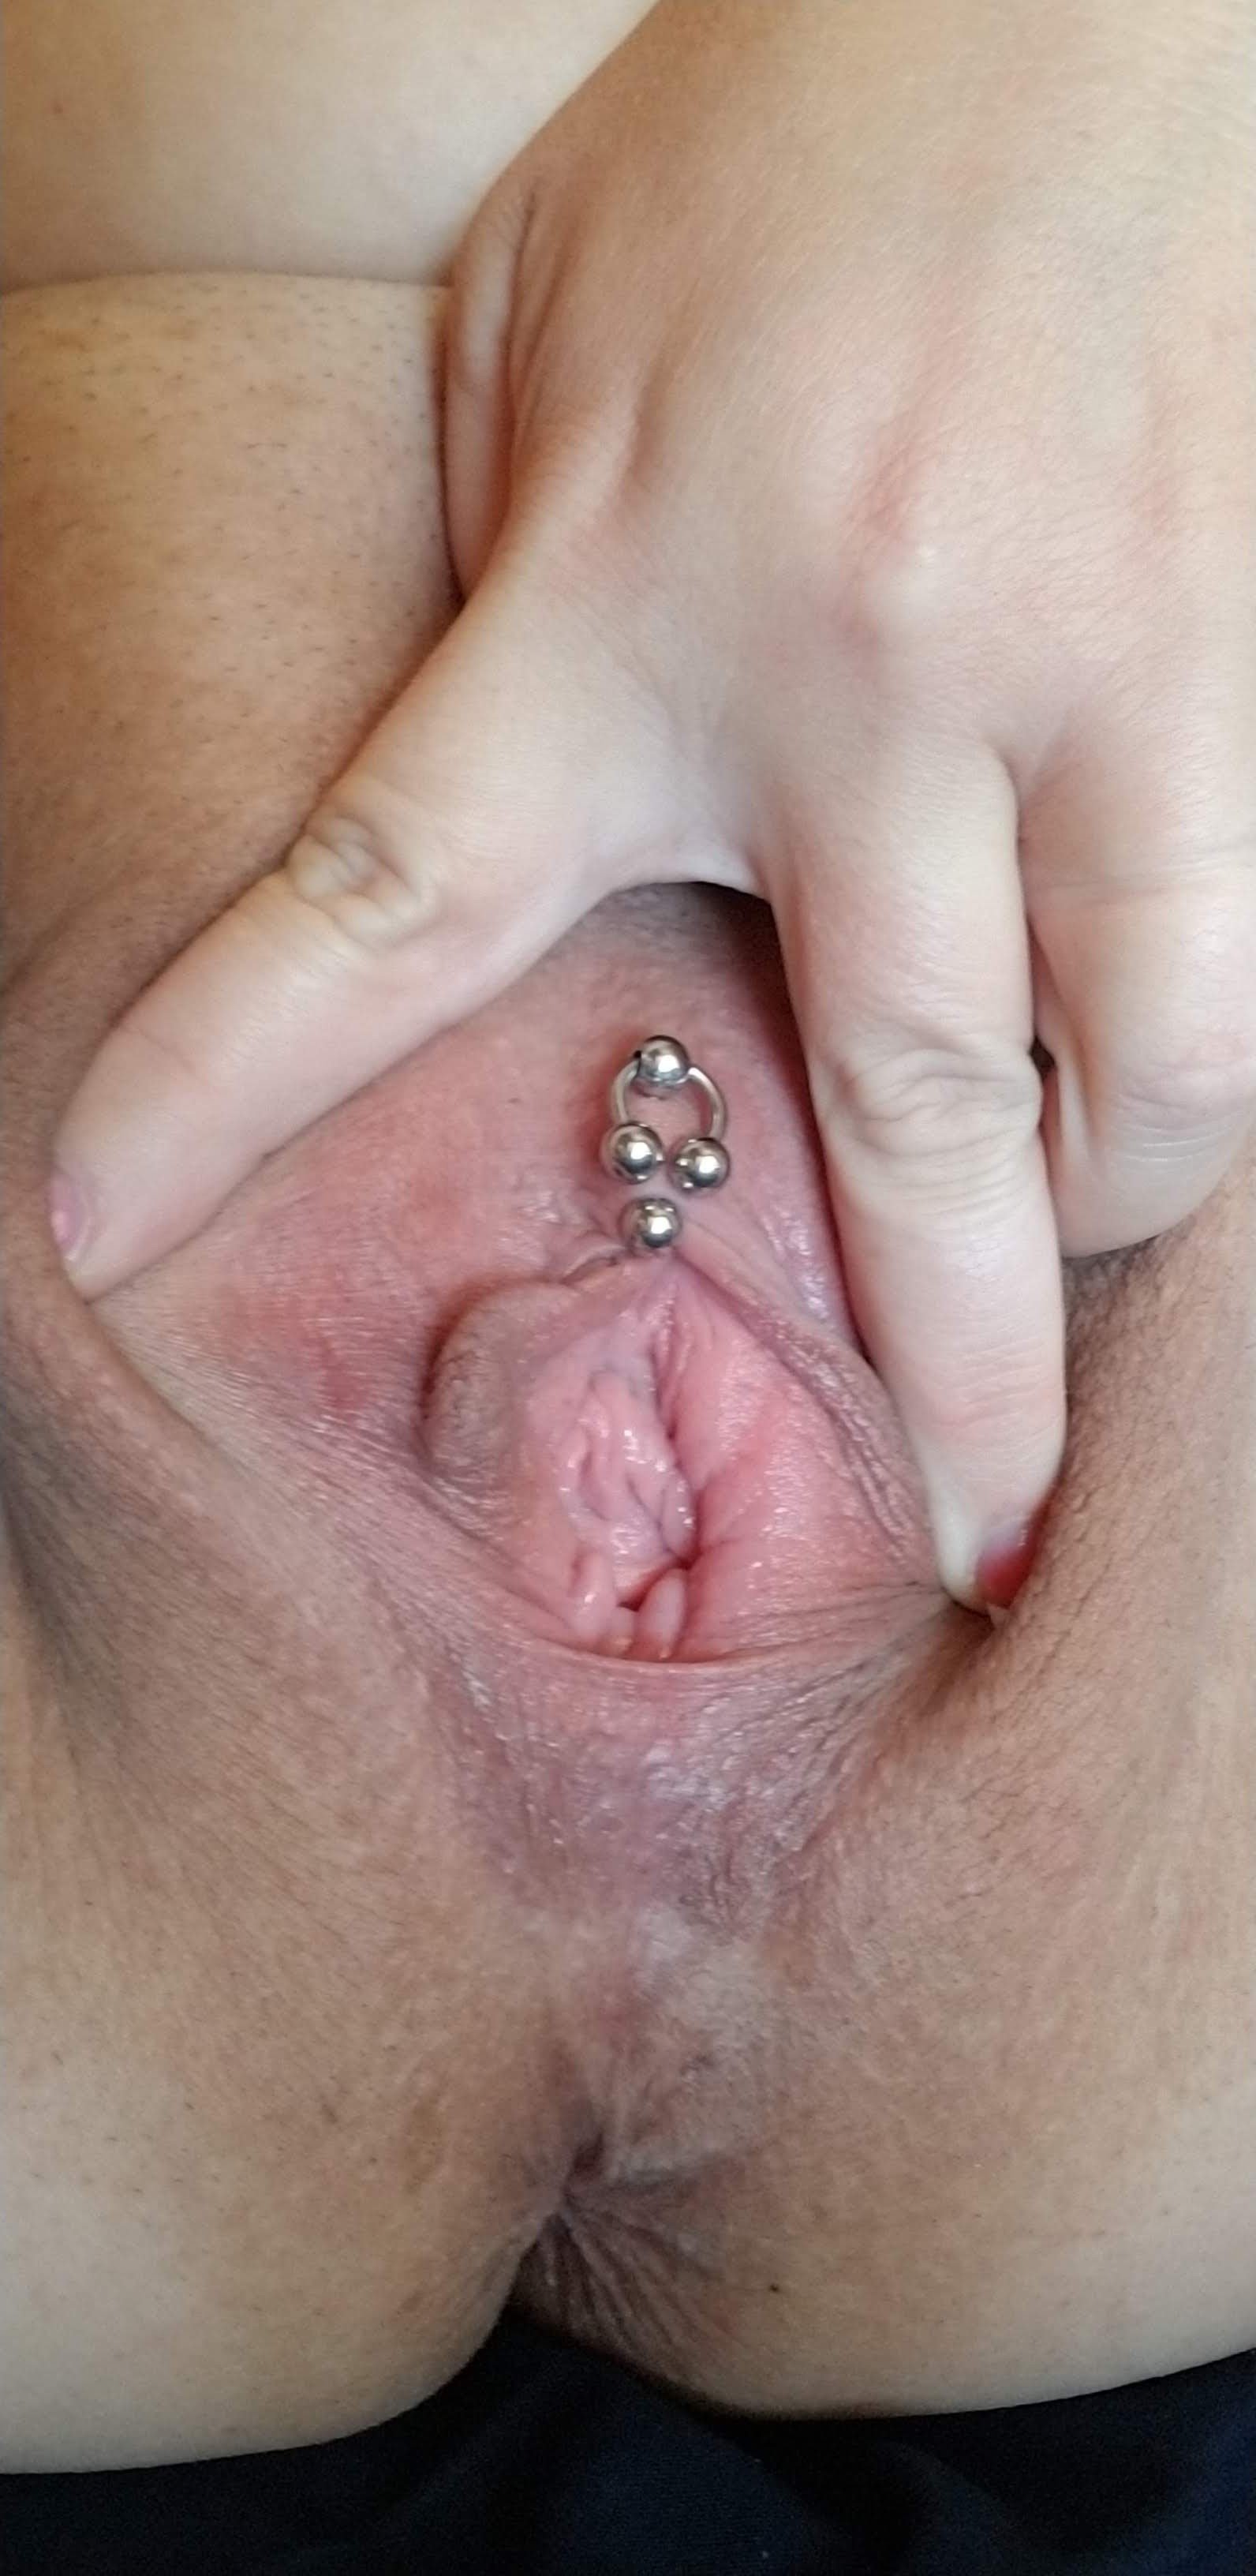 Photo by Me and my hotwife with the username @Hotwife1984,  July 24, 2020 at 9:32 PM. The post is about the topic Pussy and the text says 'my wife'